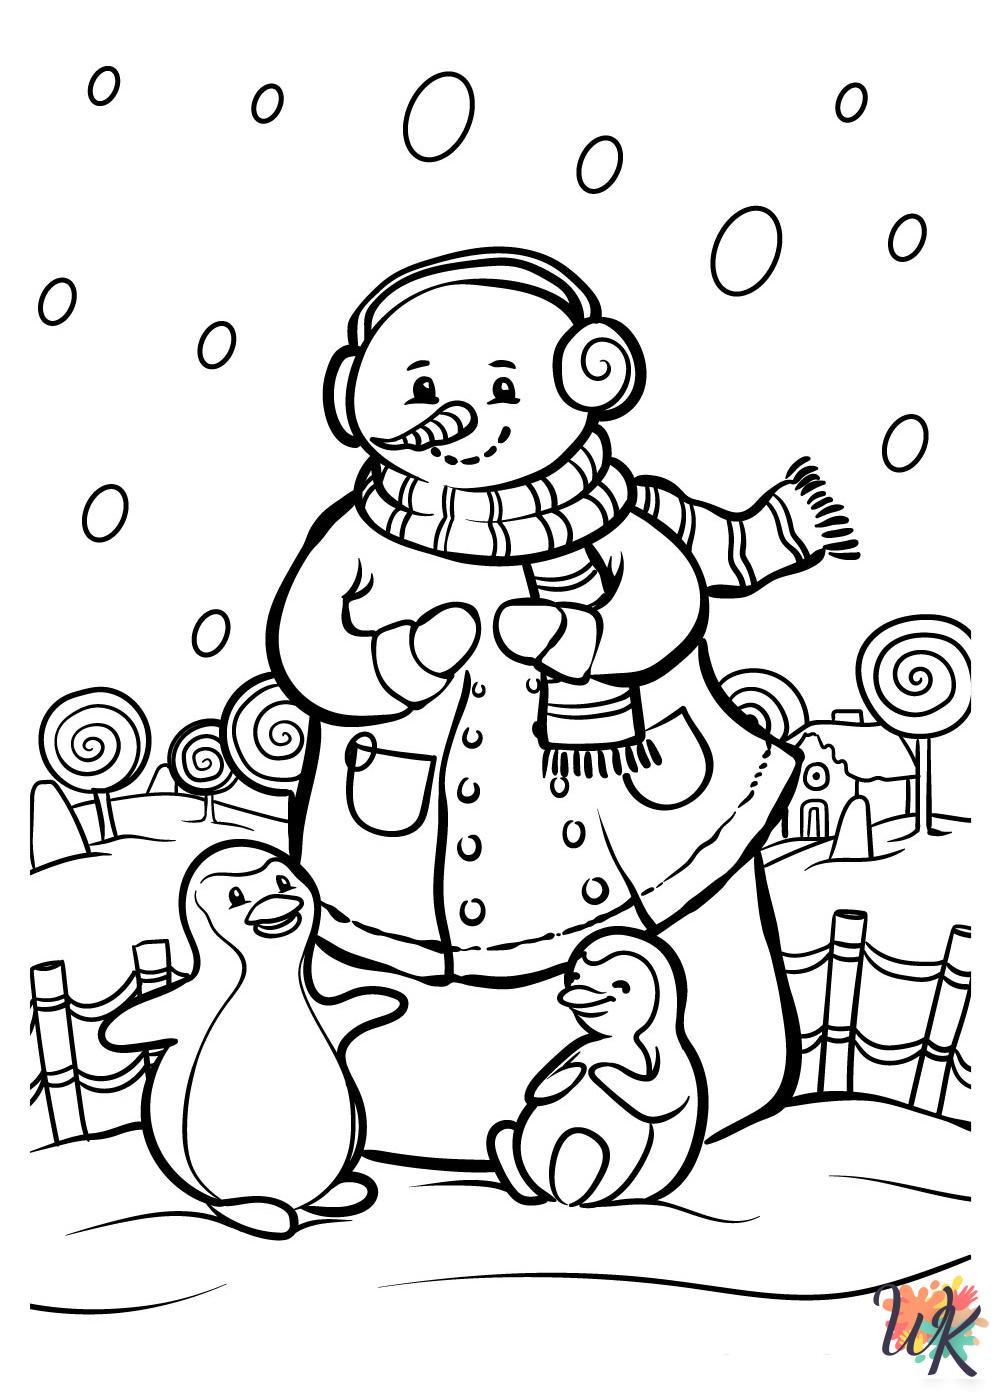 Snowman coloring pages grinch